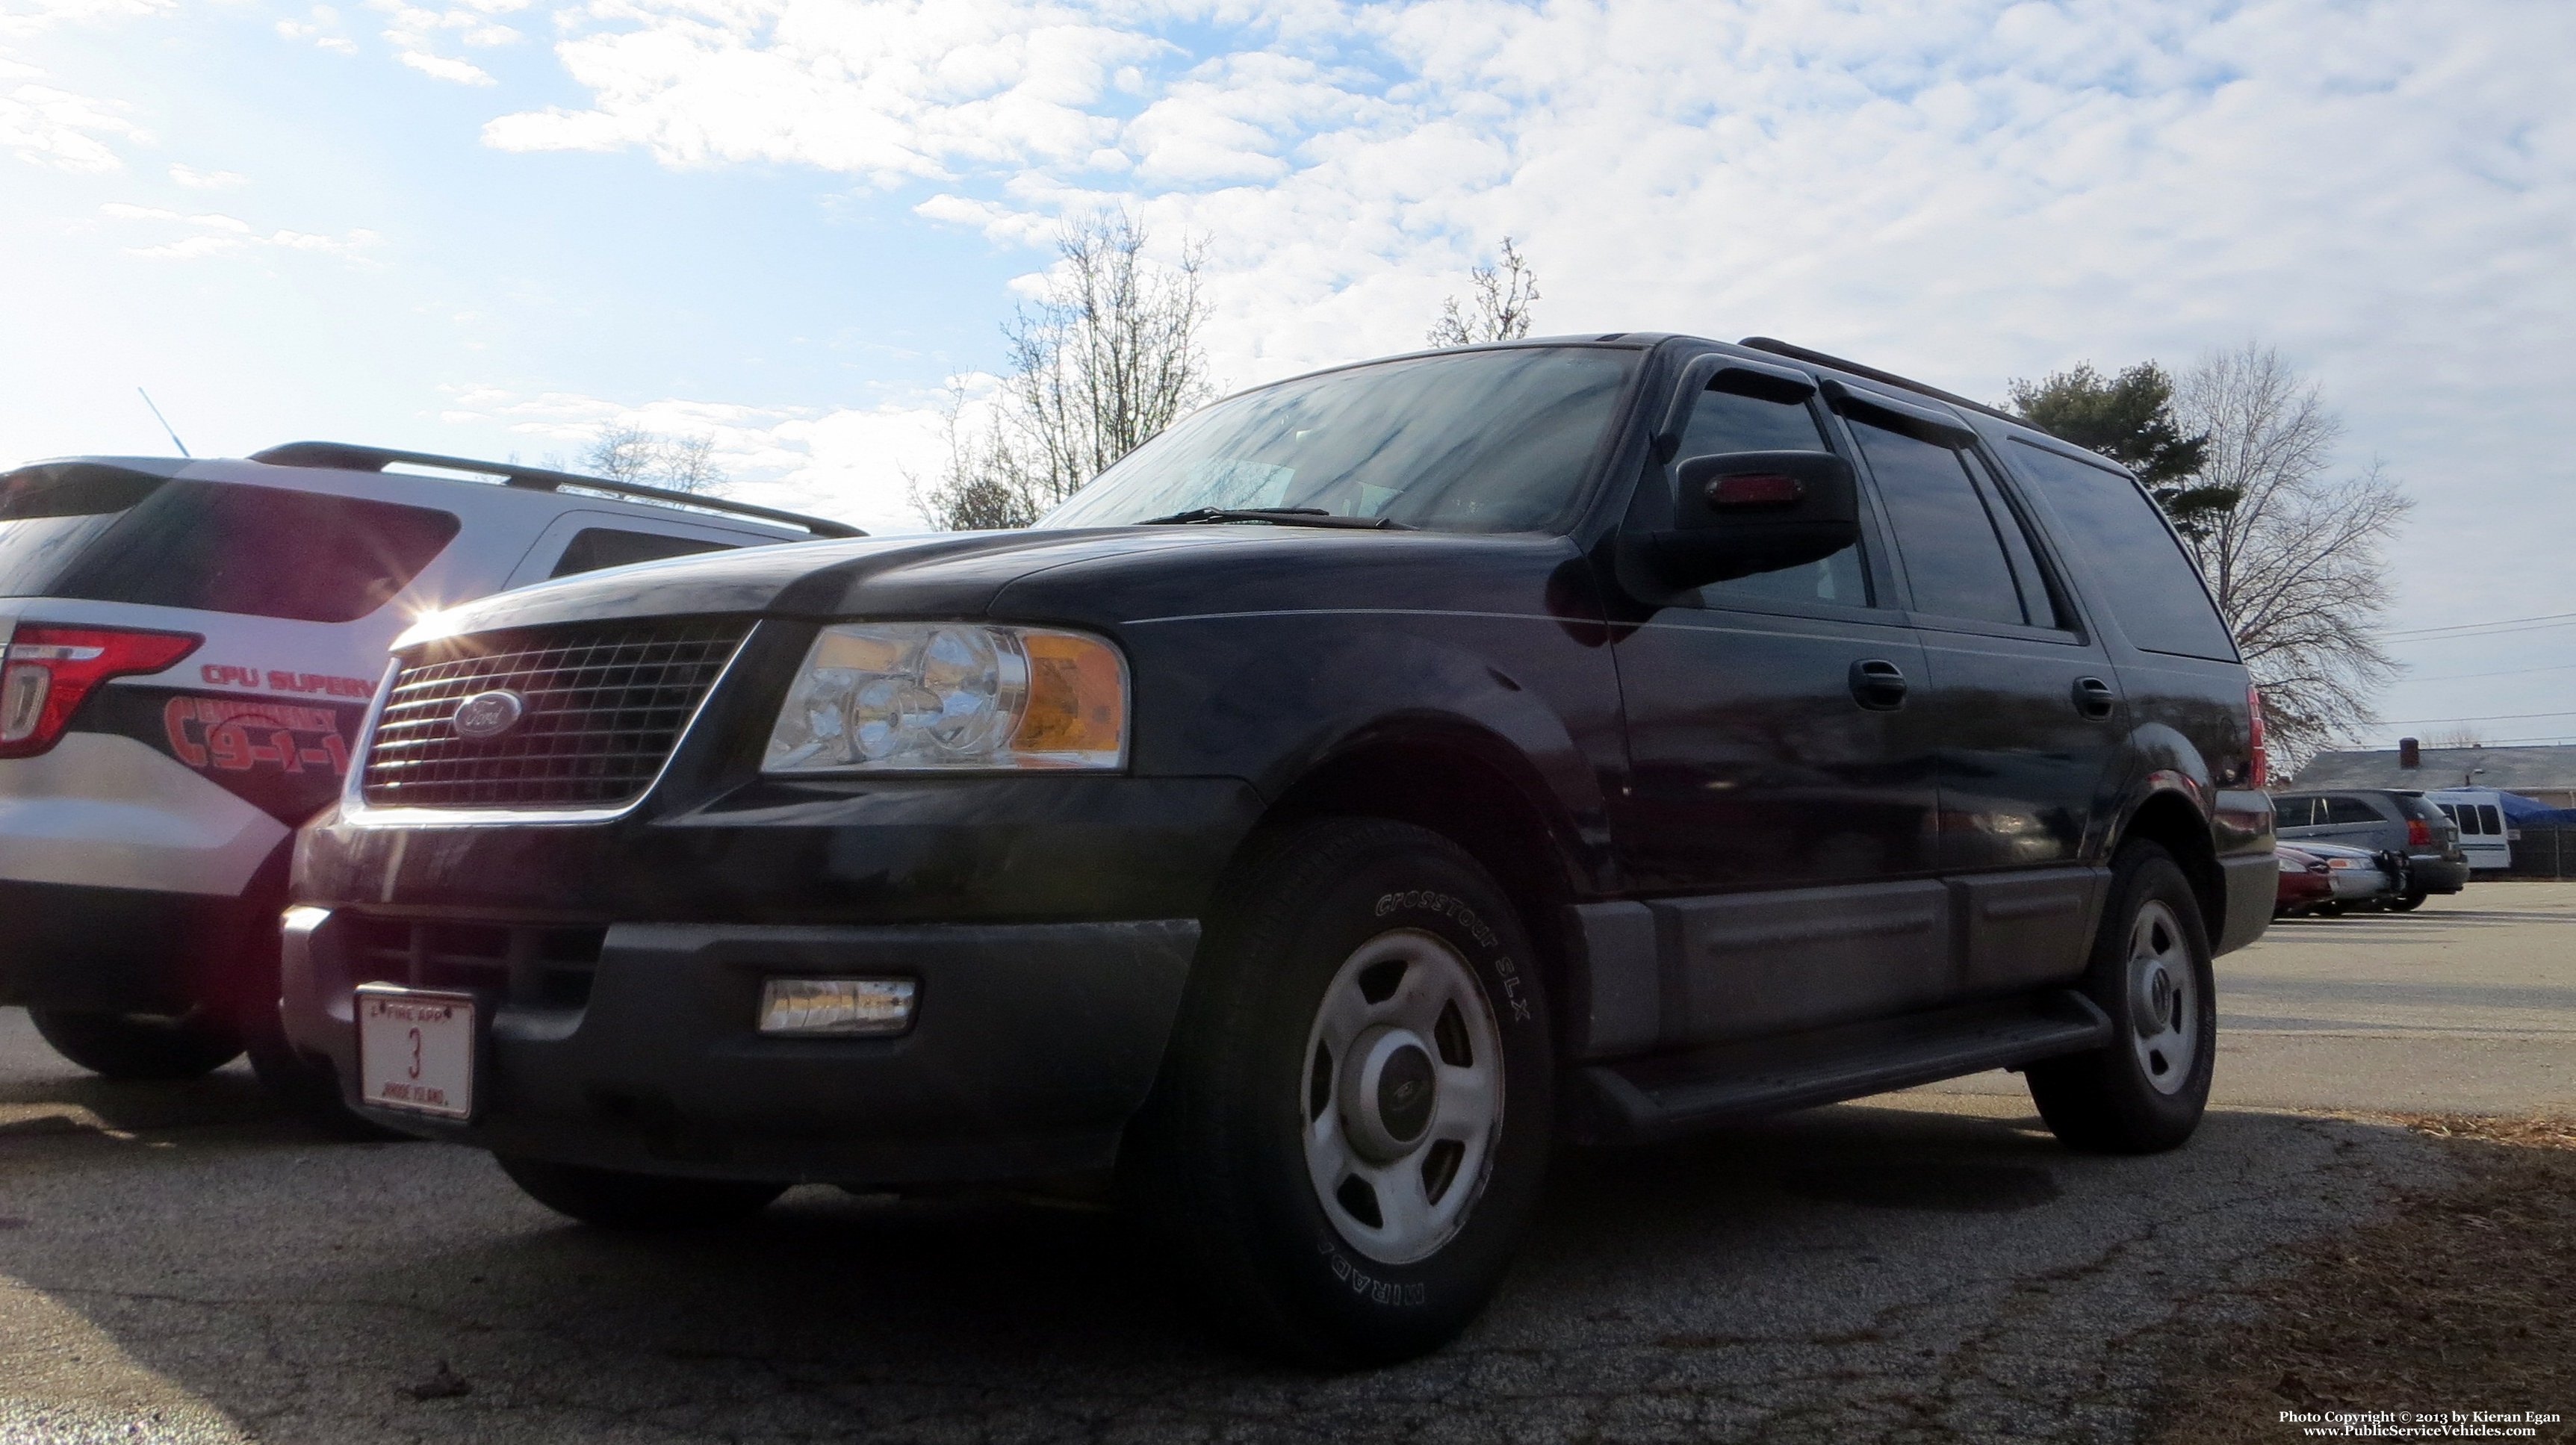 A photo  of East Providence Fire
            Car 1, a 2003-2006 Ford Expedition             taken by Kieran Egan